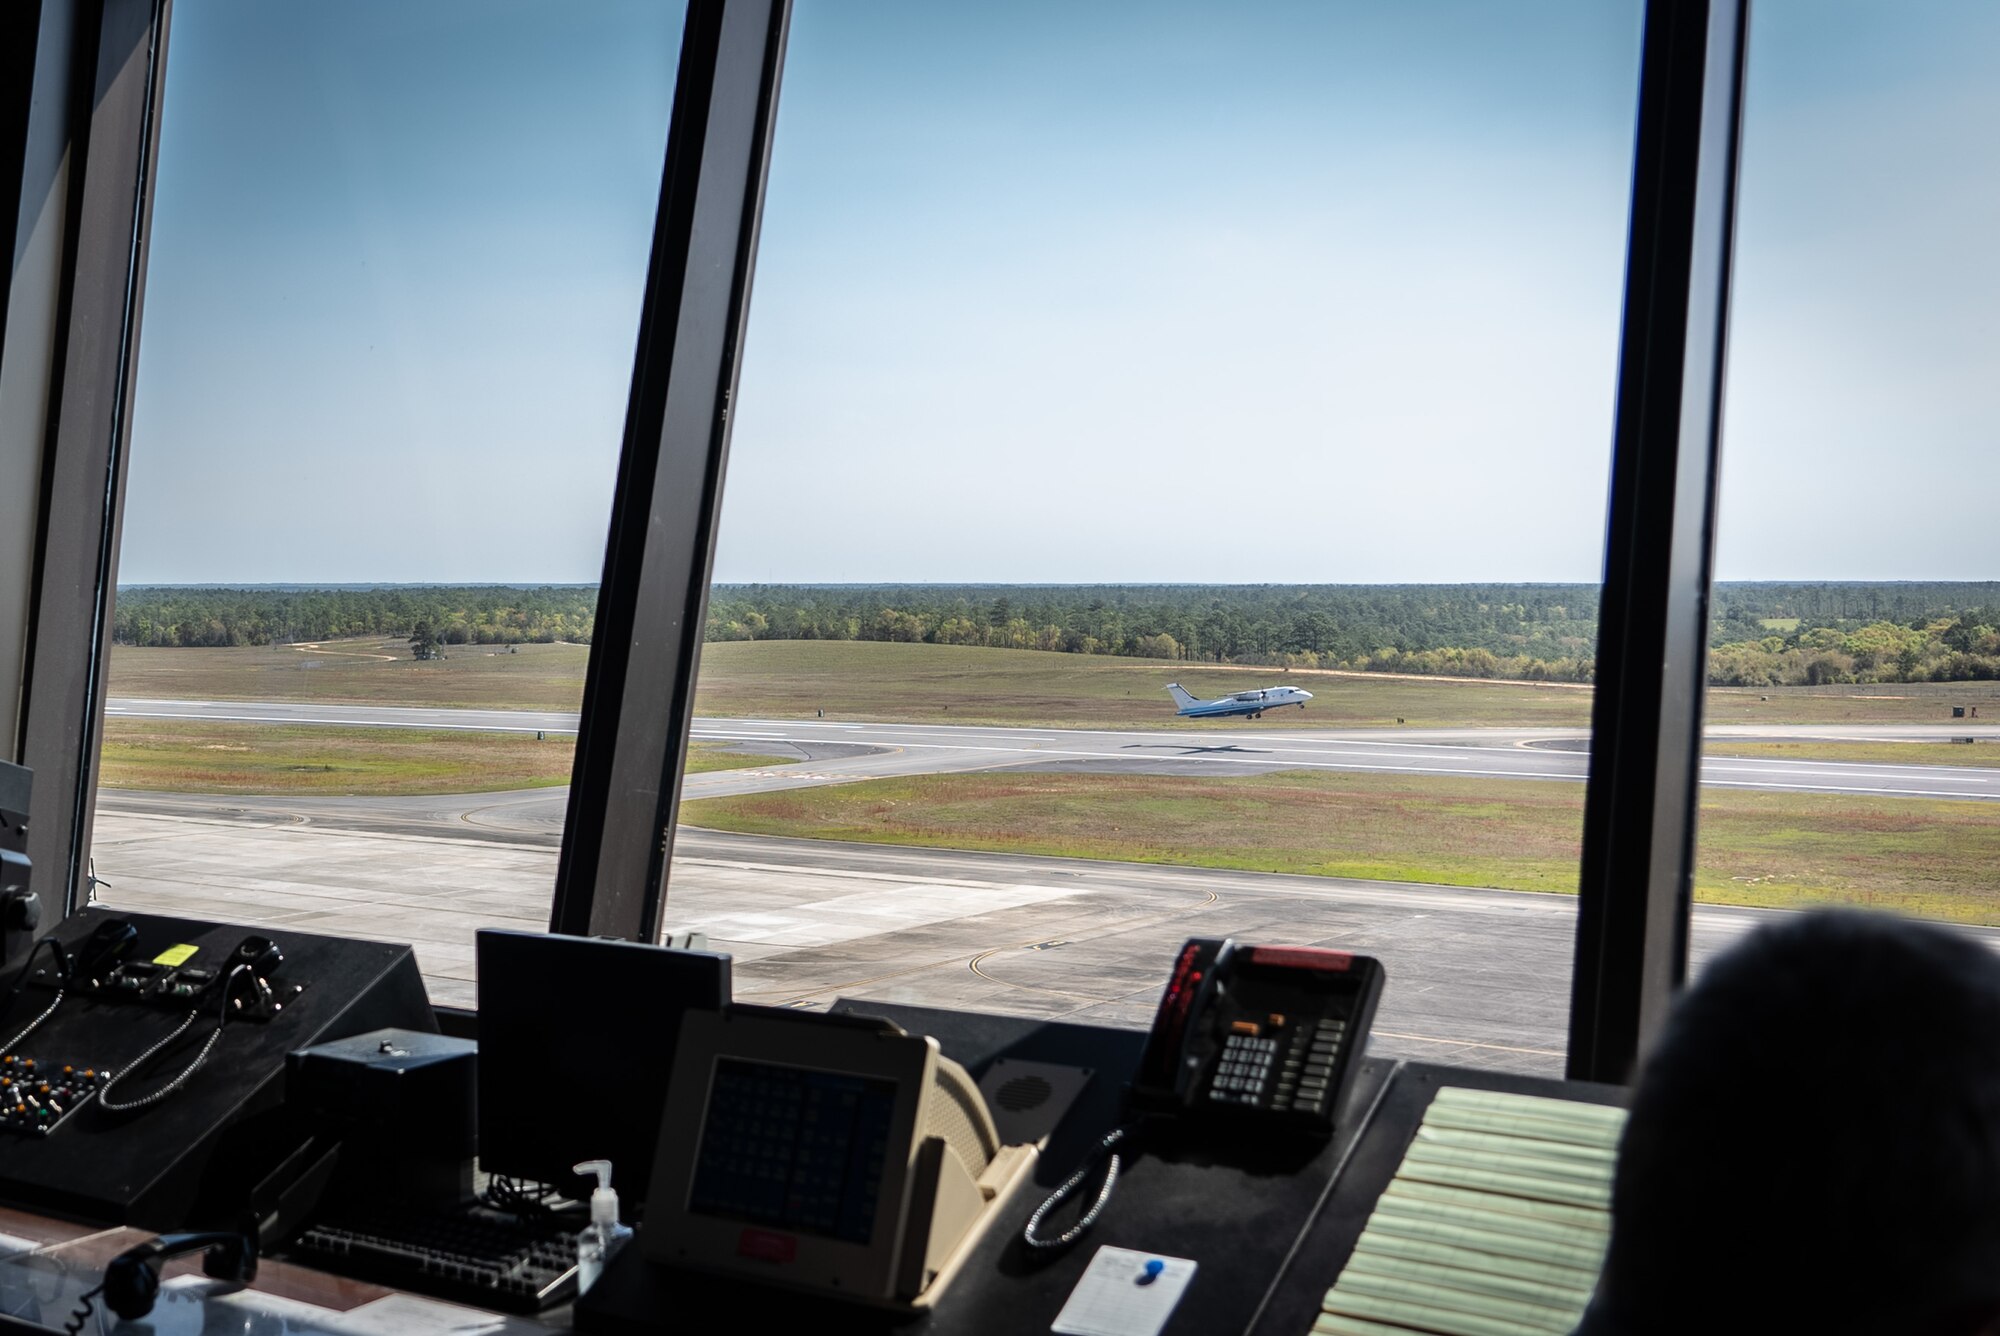 Aircraft takes off from runway as seen through window of control tower.